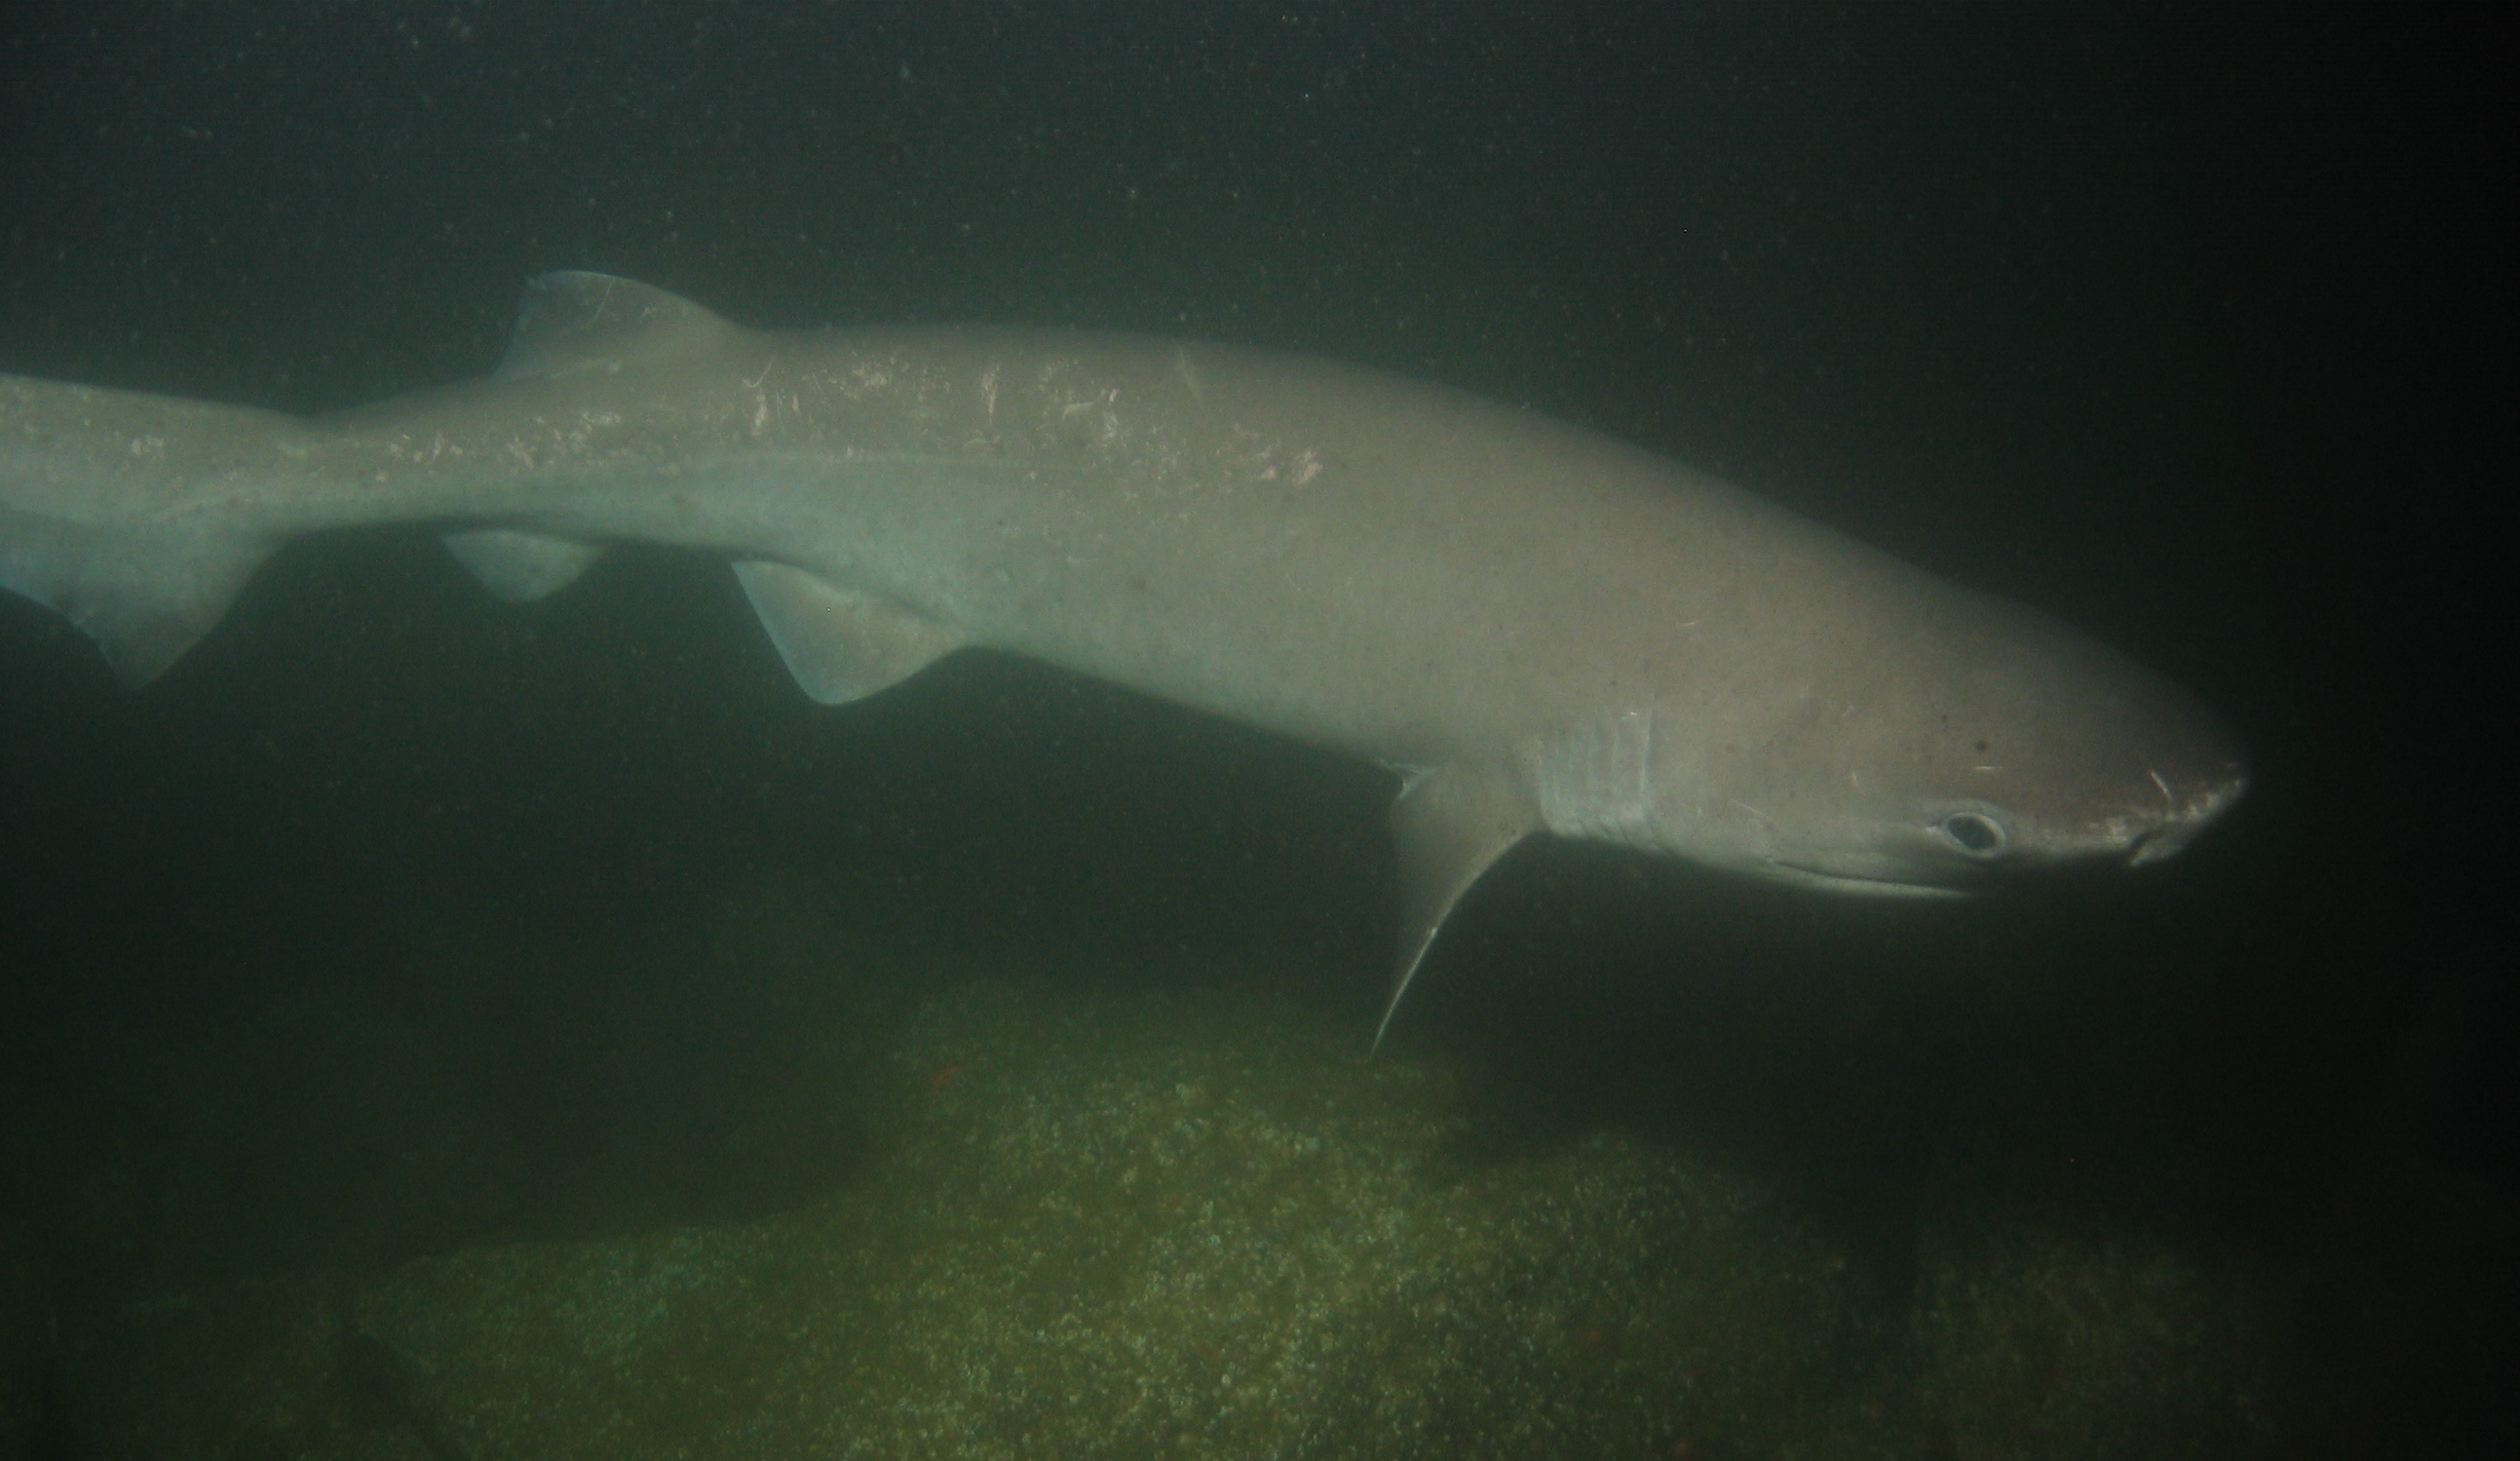 Sixgill shark observed in the murky waters of the Reading Rock SMR.